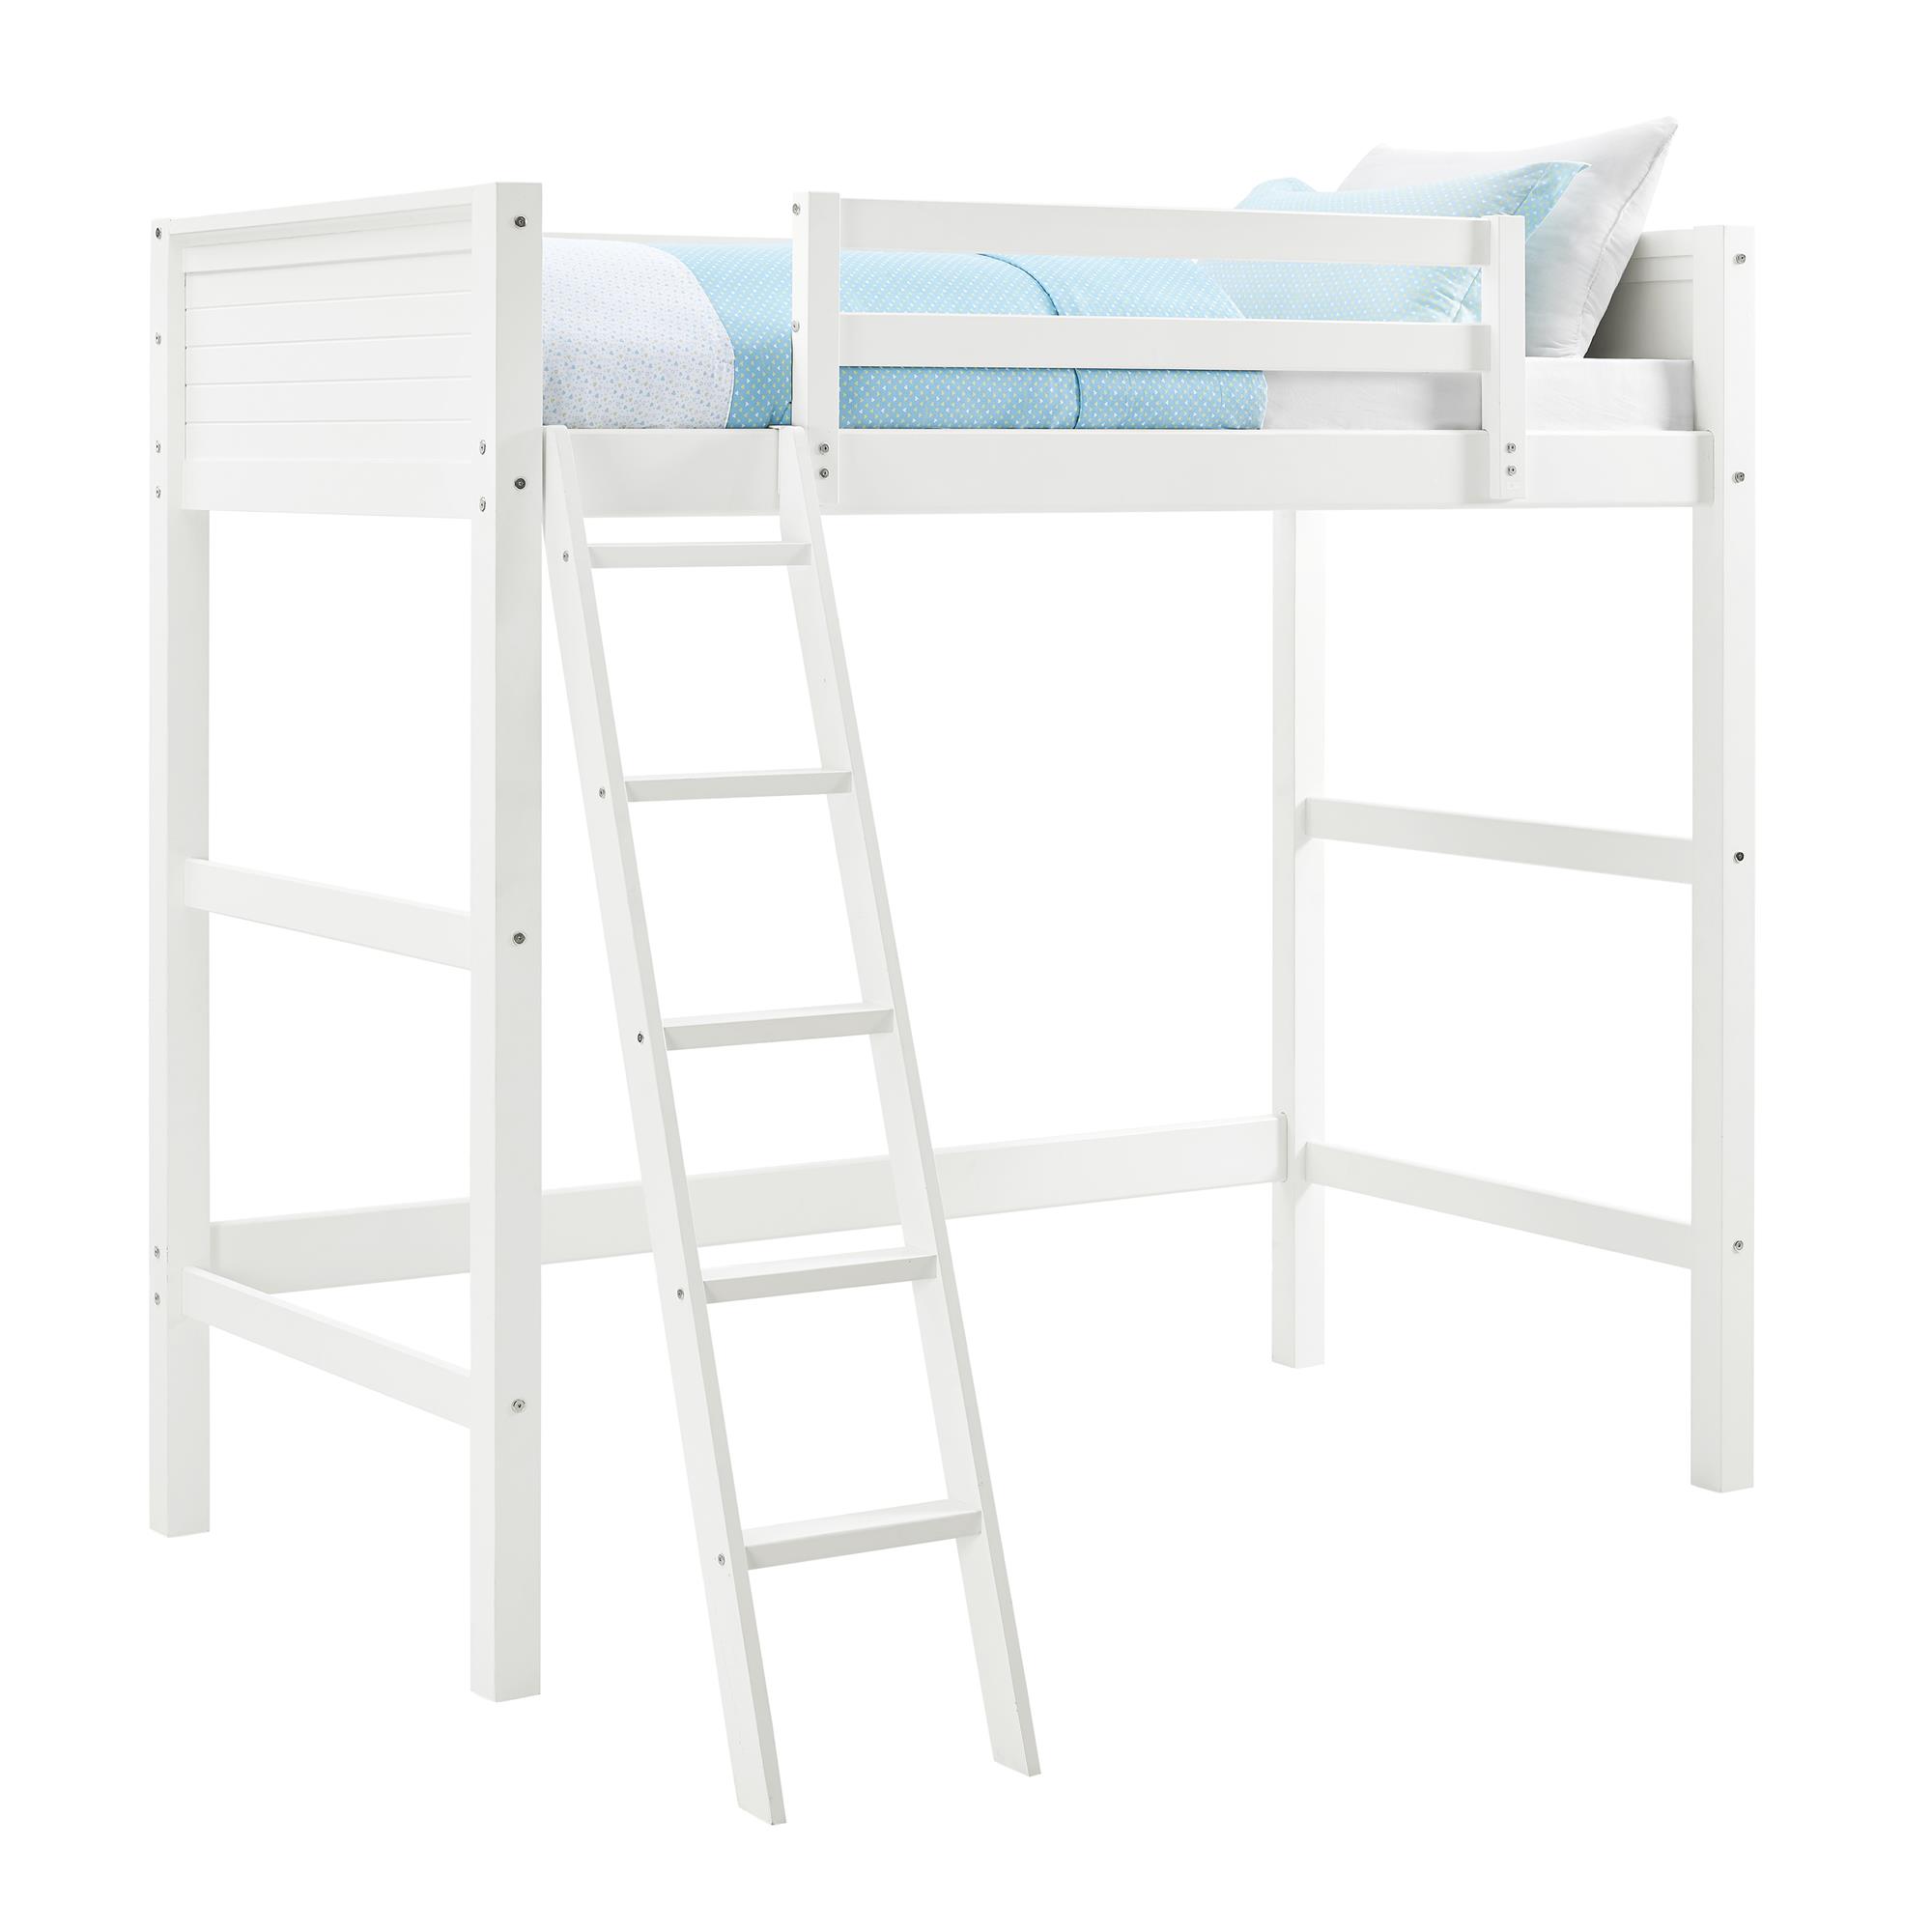 Your Zone Kiarah Twin Loft Bed with Ladder, White - image 3 of 18